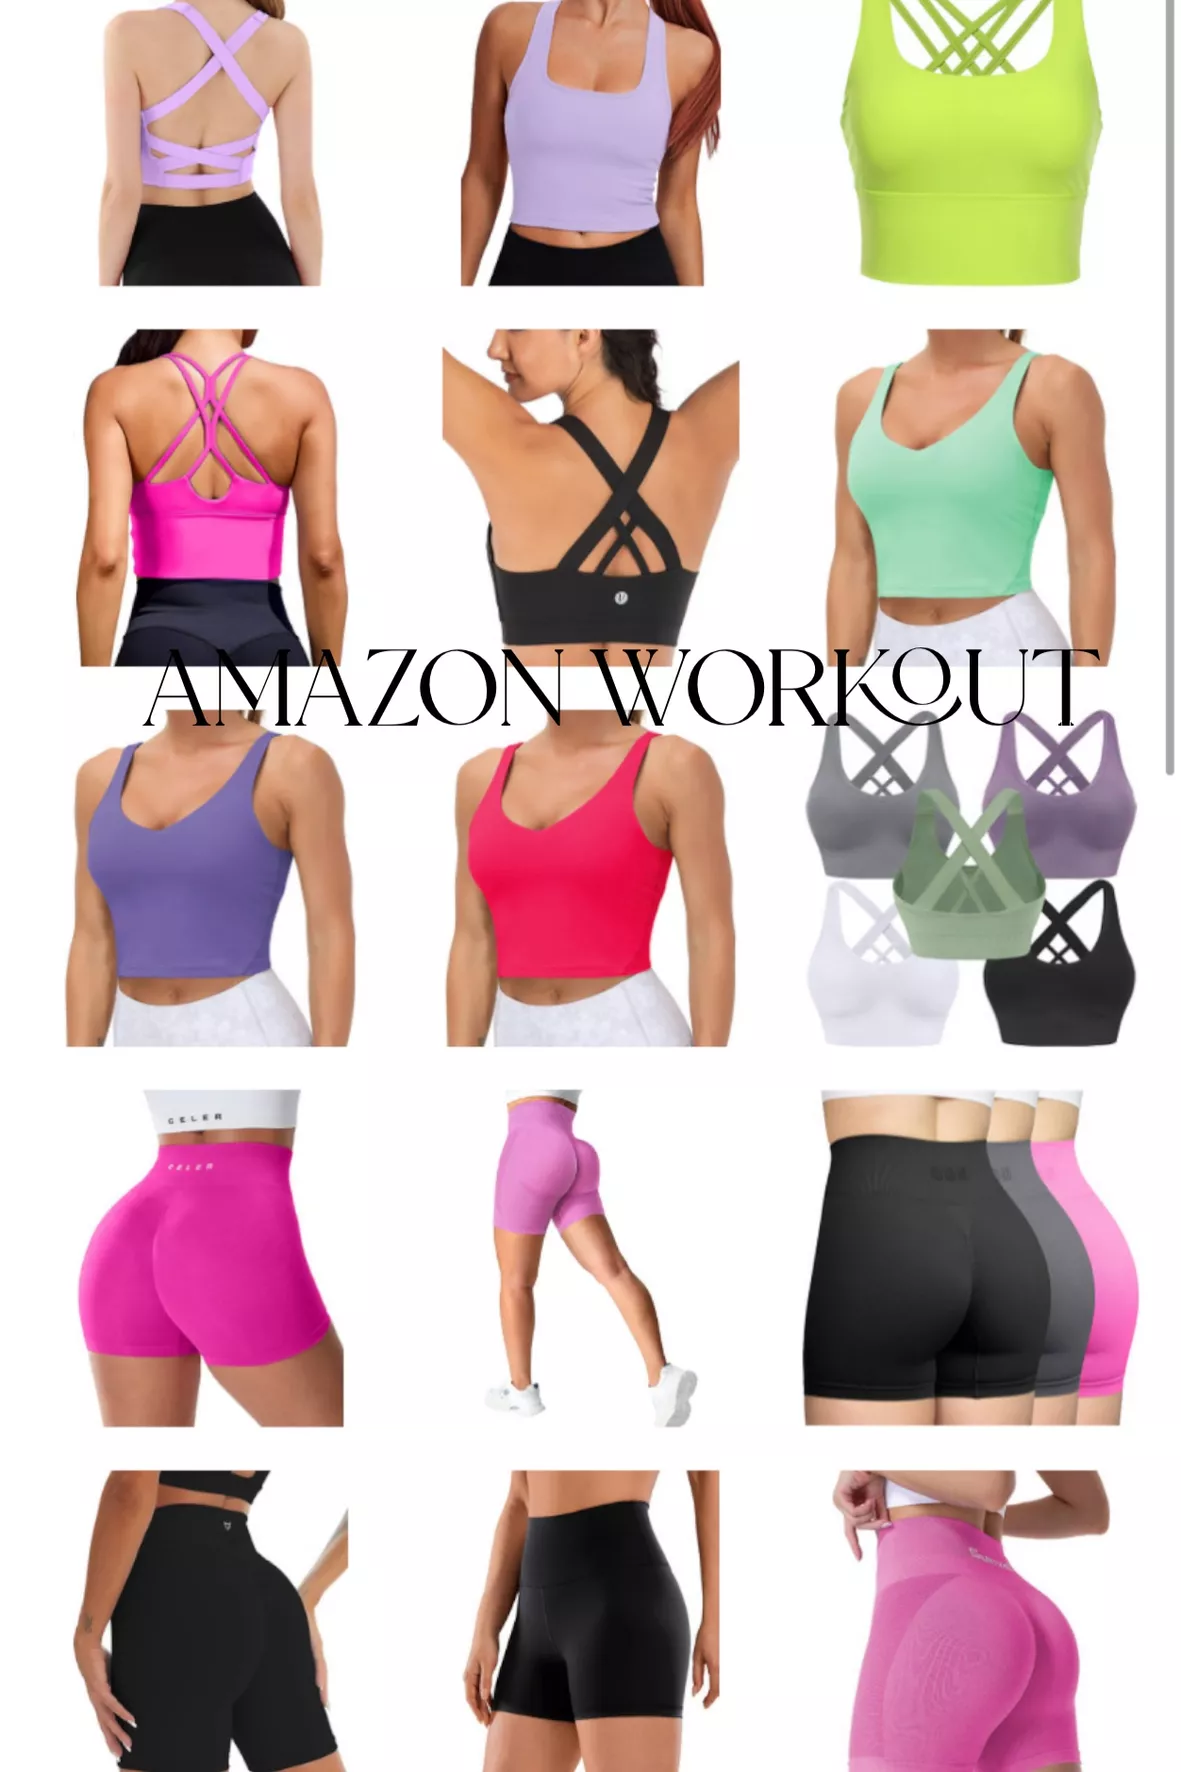 BAYDI Sports Bras for Women Workout Crop Tank Tops with Built in Bra  Athletic Longline Padded Yoga Shirts Gym Fitness at  Women's Clothing  store